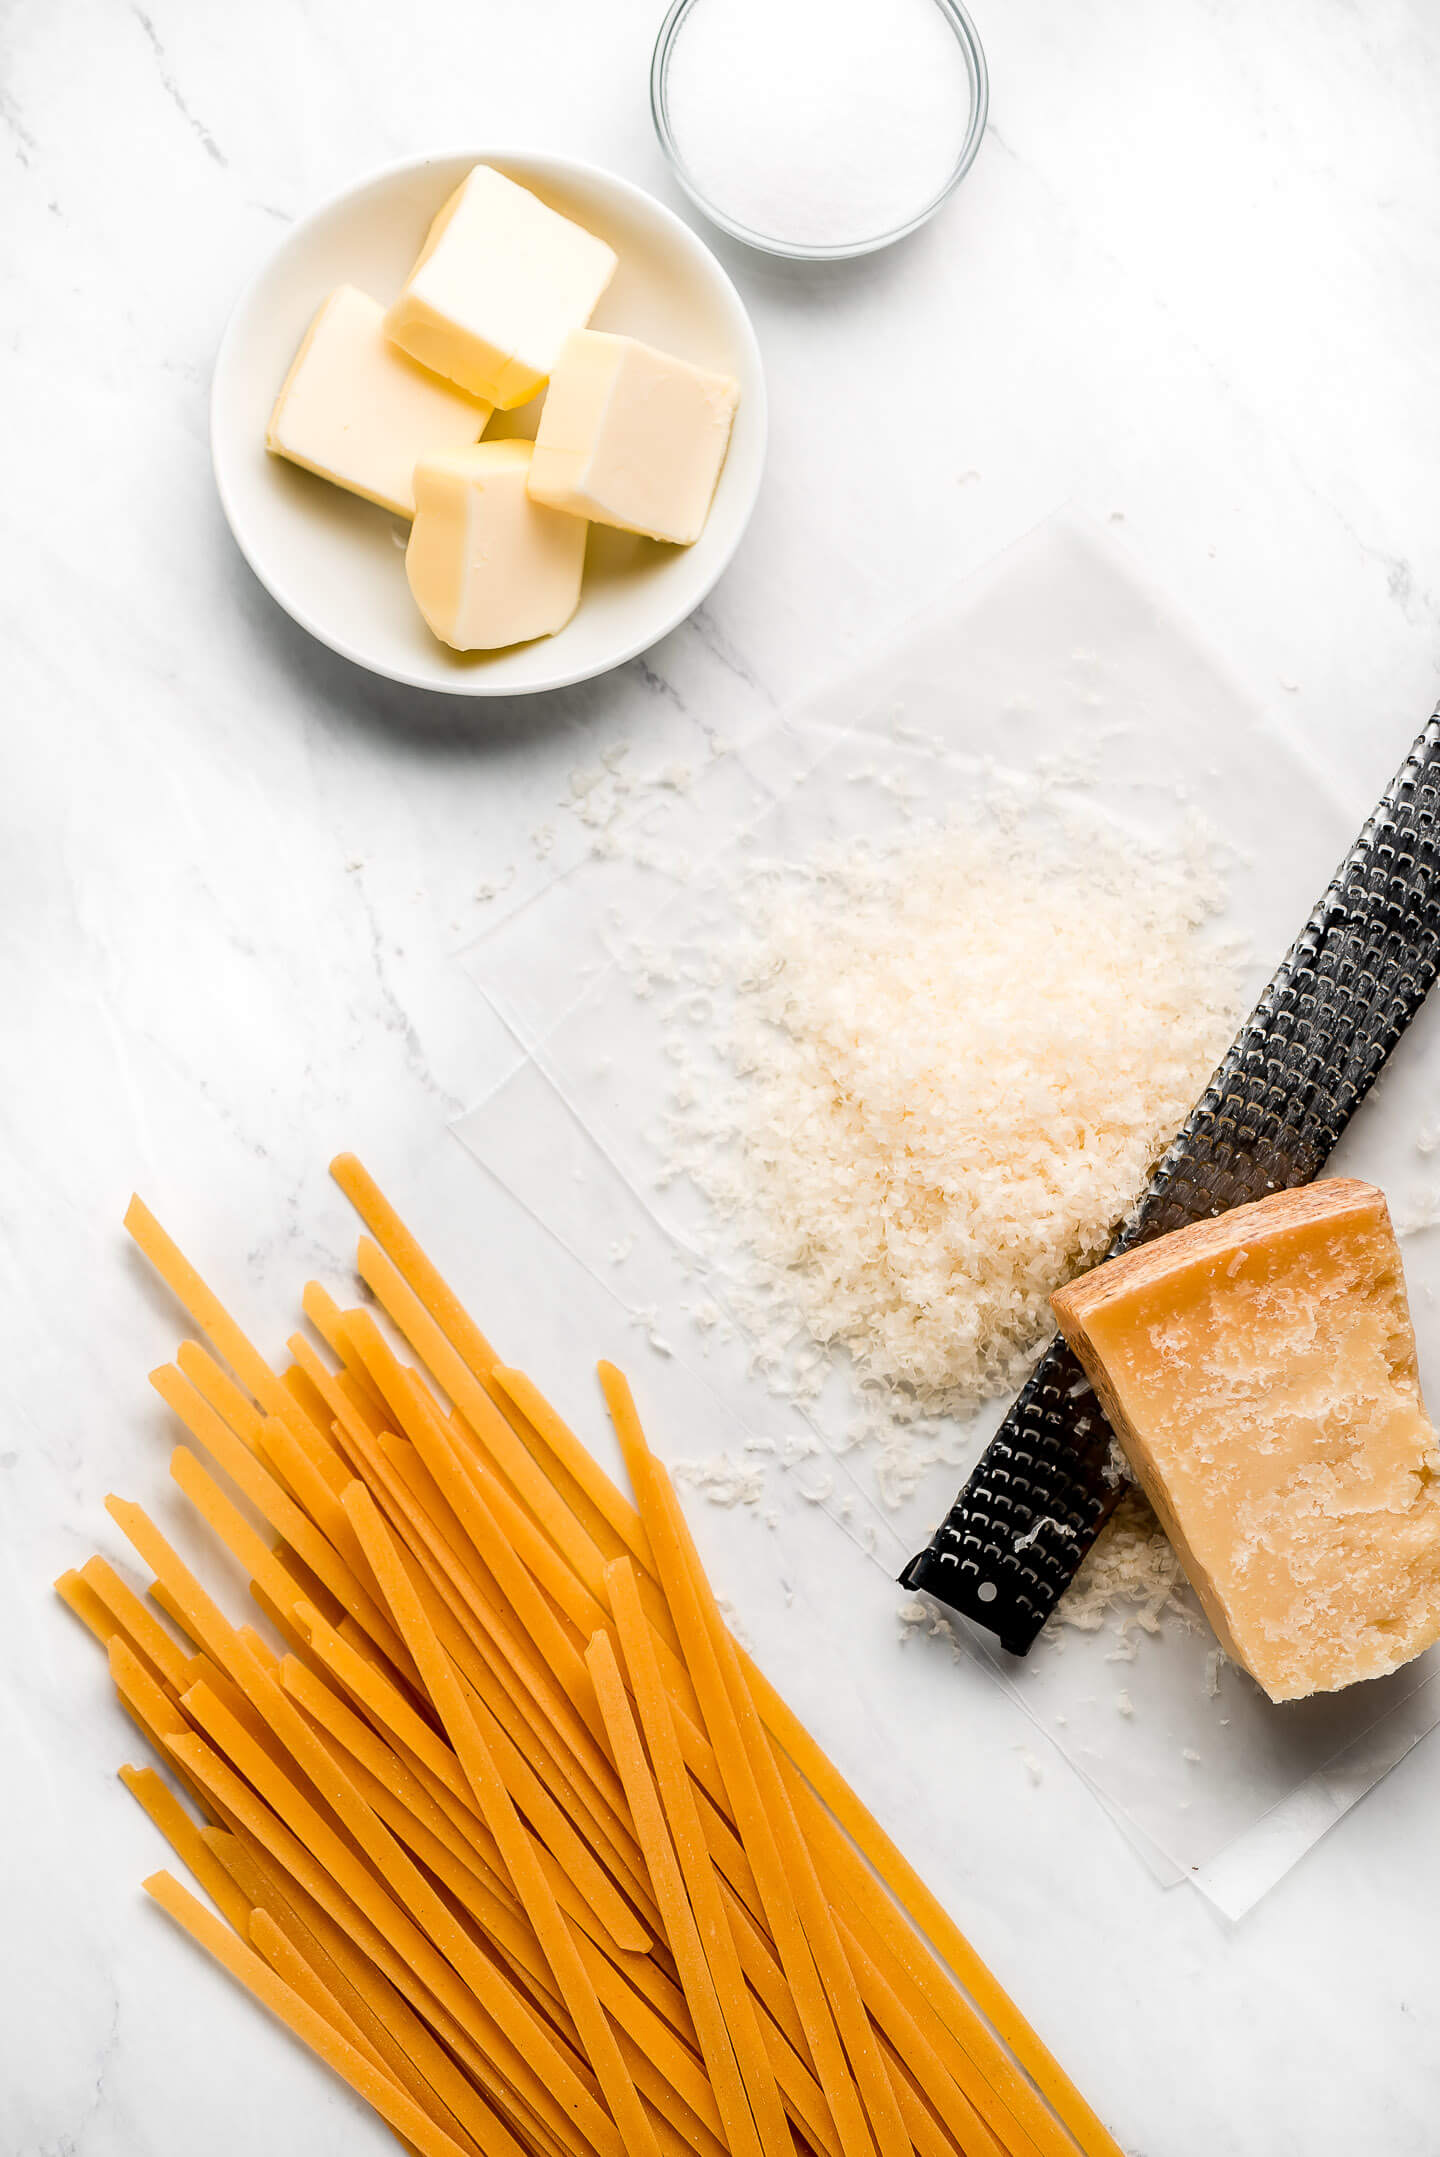 Ingredients on a marble surface: butter, salt, parmigiano reggiano, and dried fettuccine pasta.